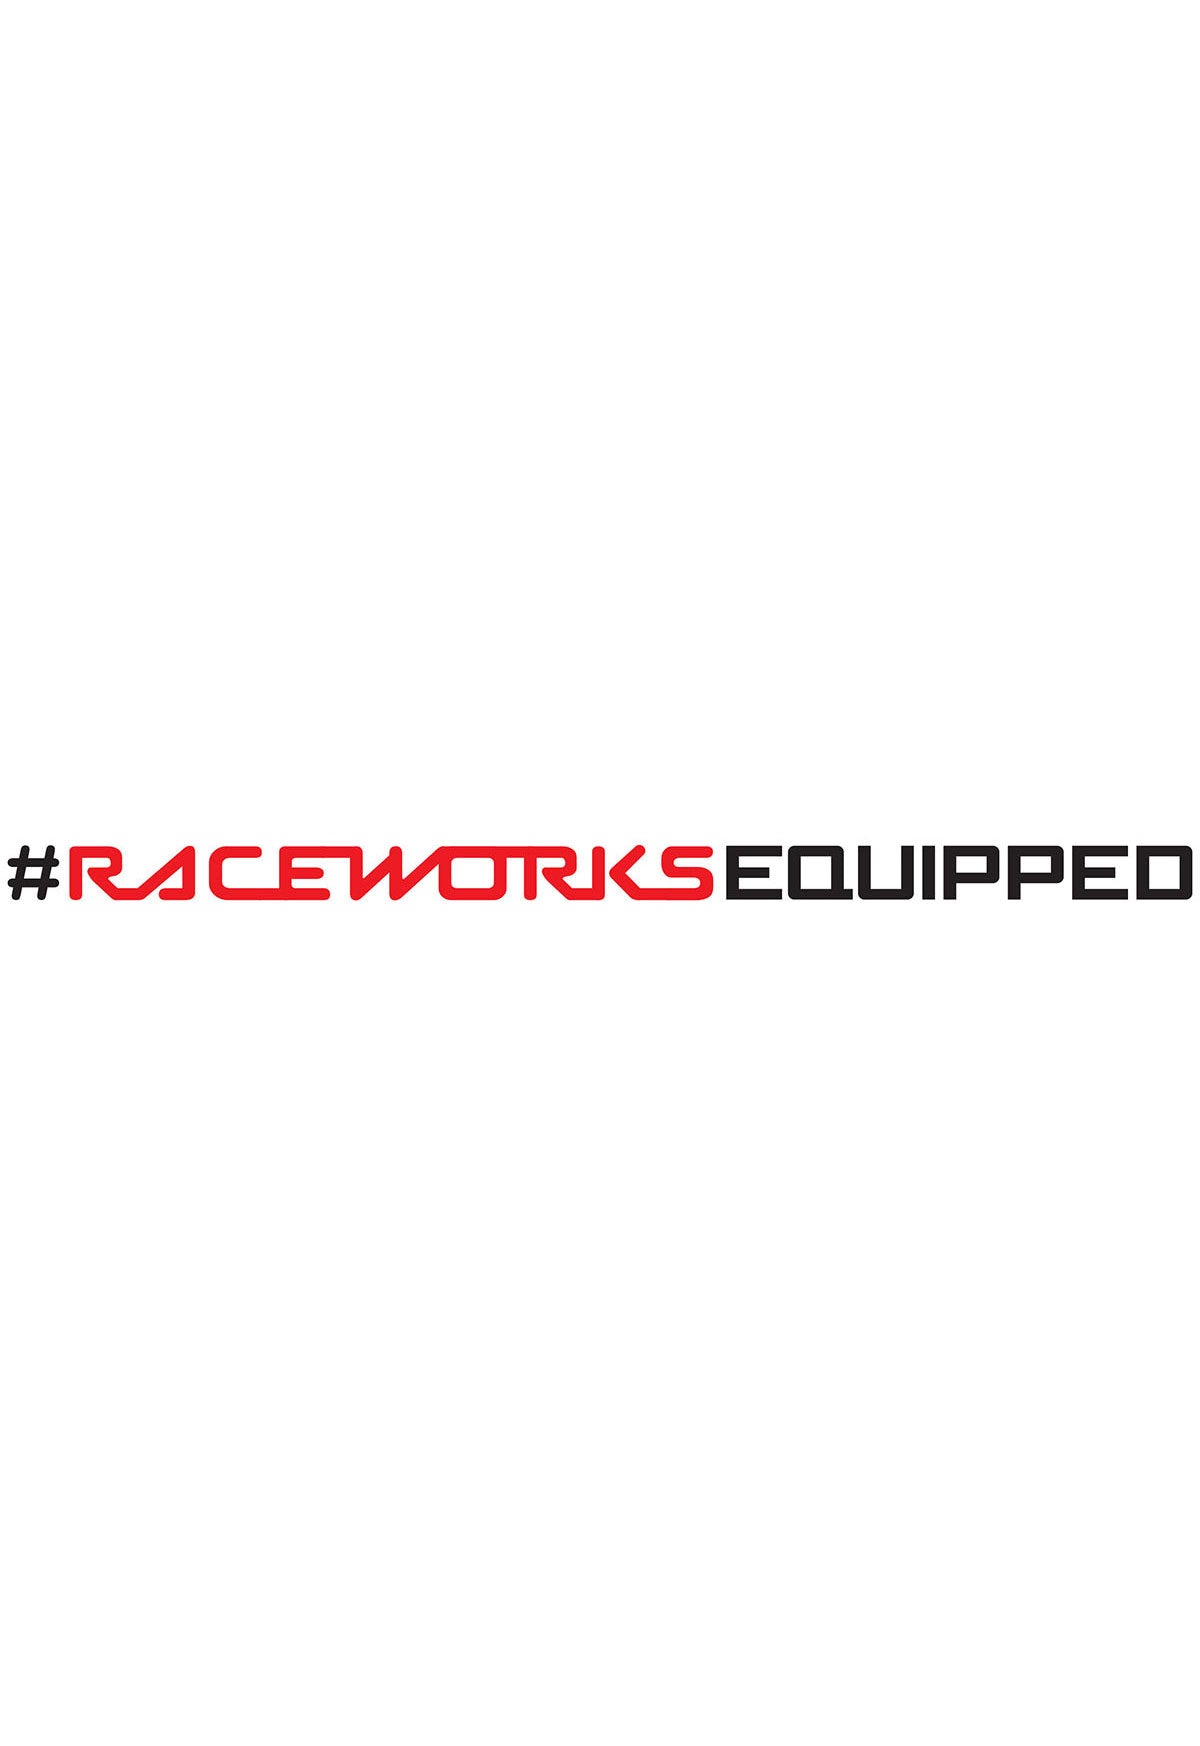 Raceworks Equipped Sticker